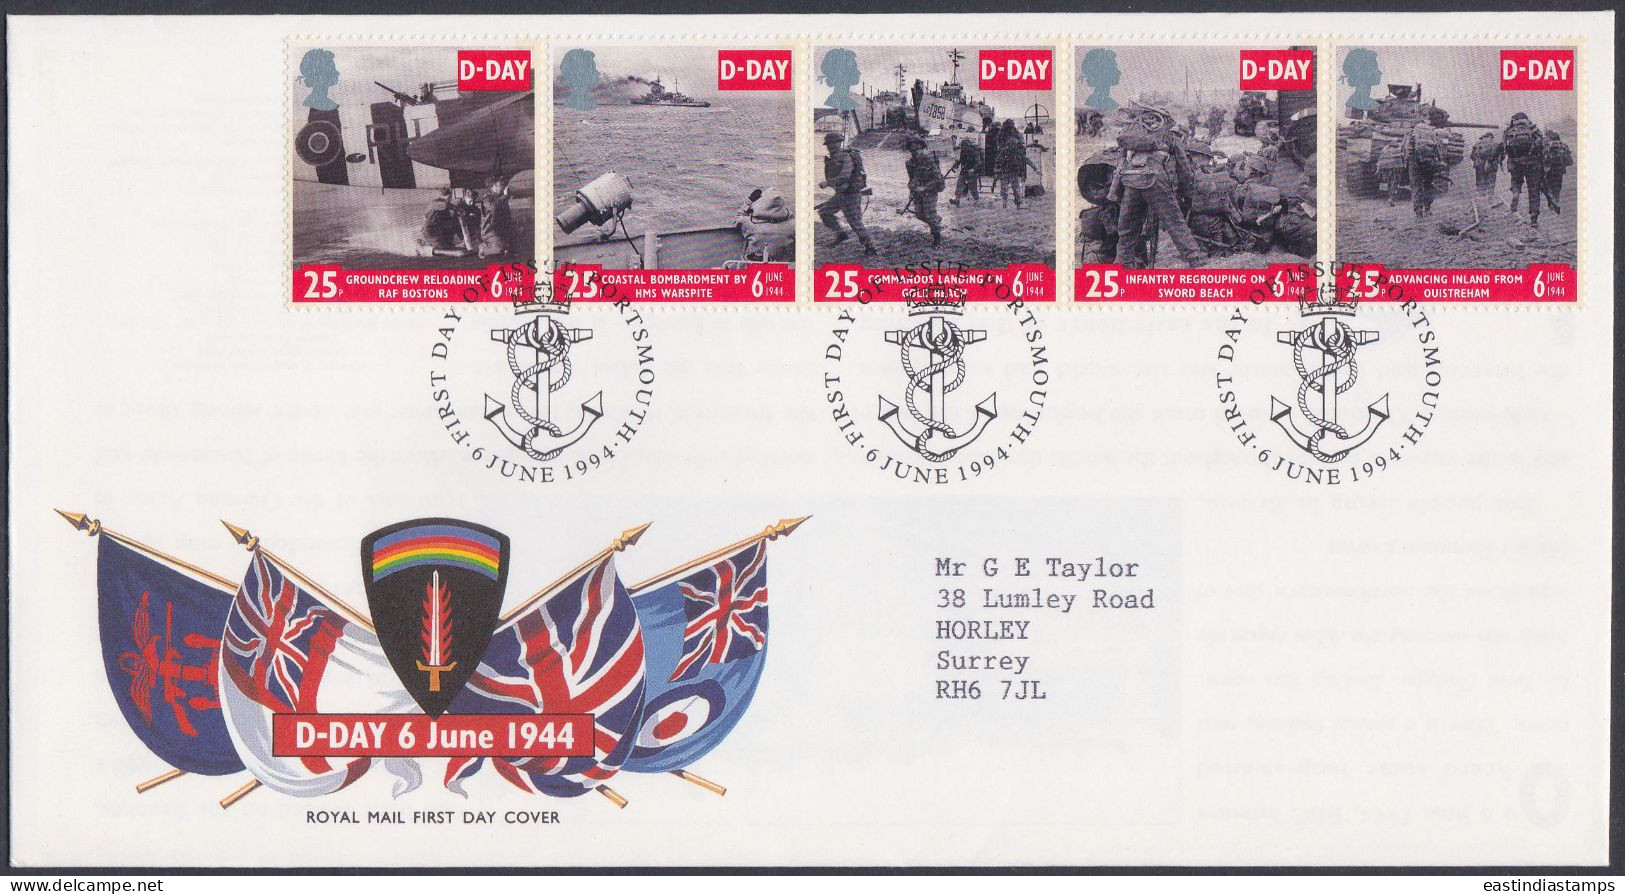 GB Great Britain 1994 FDC D-Day, World War 2, Wars, Soldier, Army, Navy, Ship, Tank, Pictorial Postmark, First Day Cover - Covers & Documents